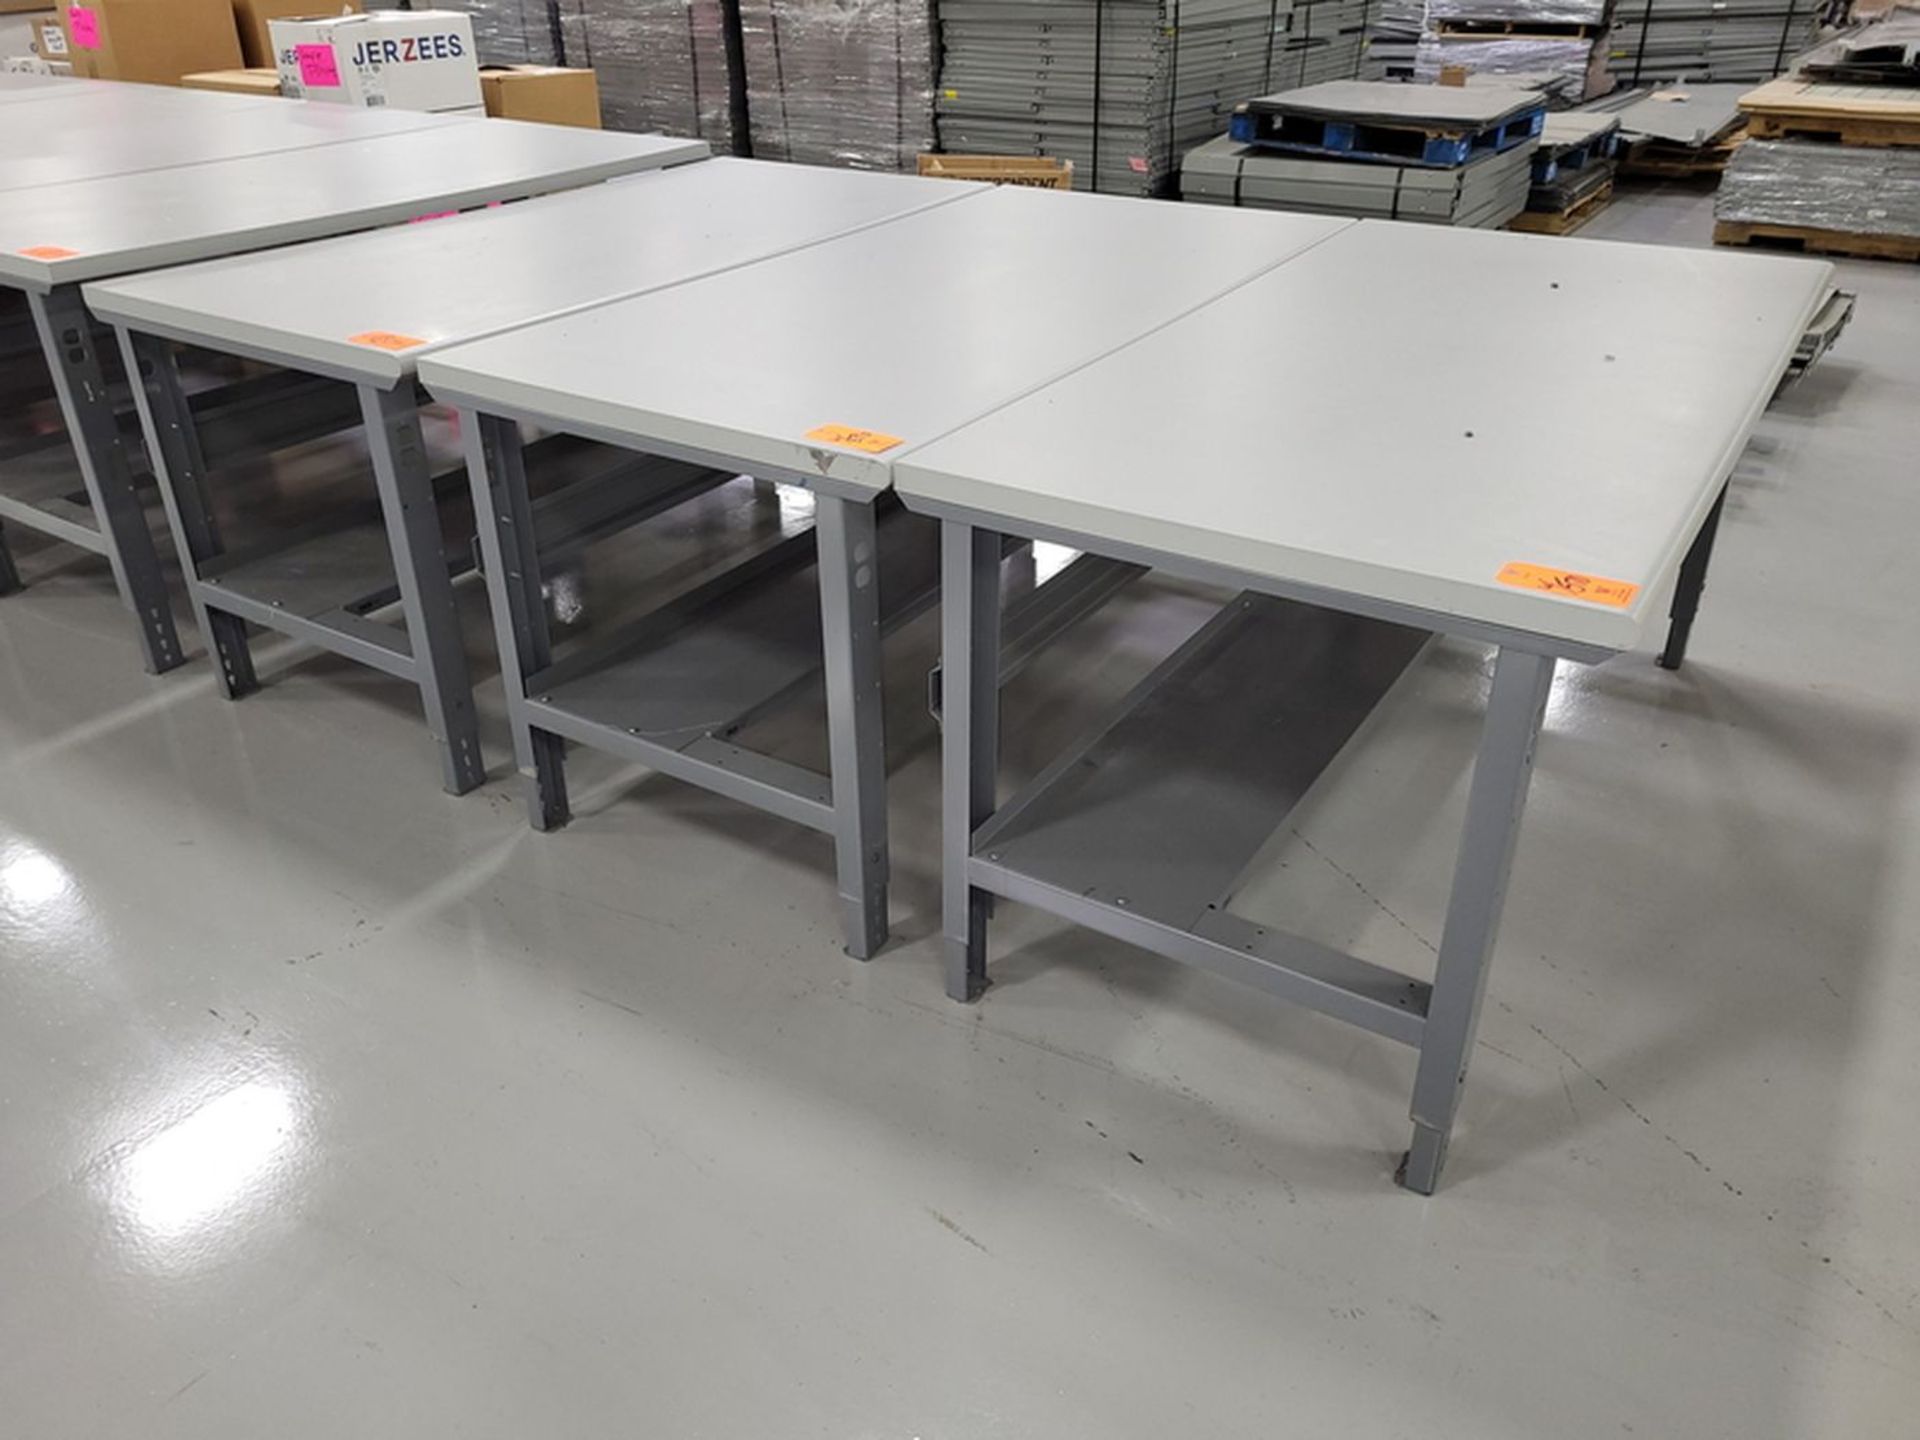 Lot - (3) Laminate Top Work Tables; 6 ft. x 3 ft., Adjustable Height